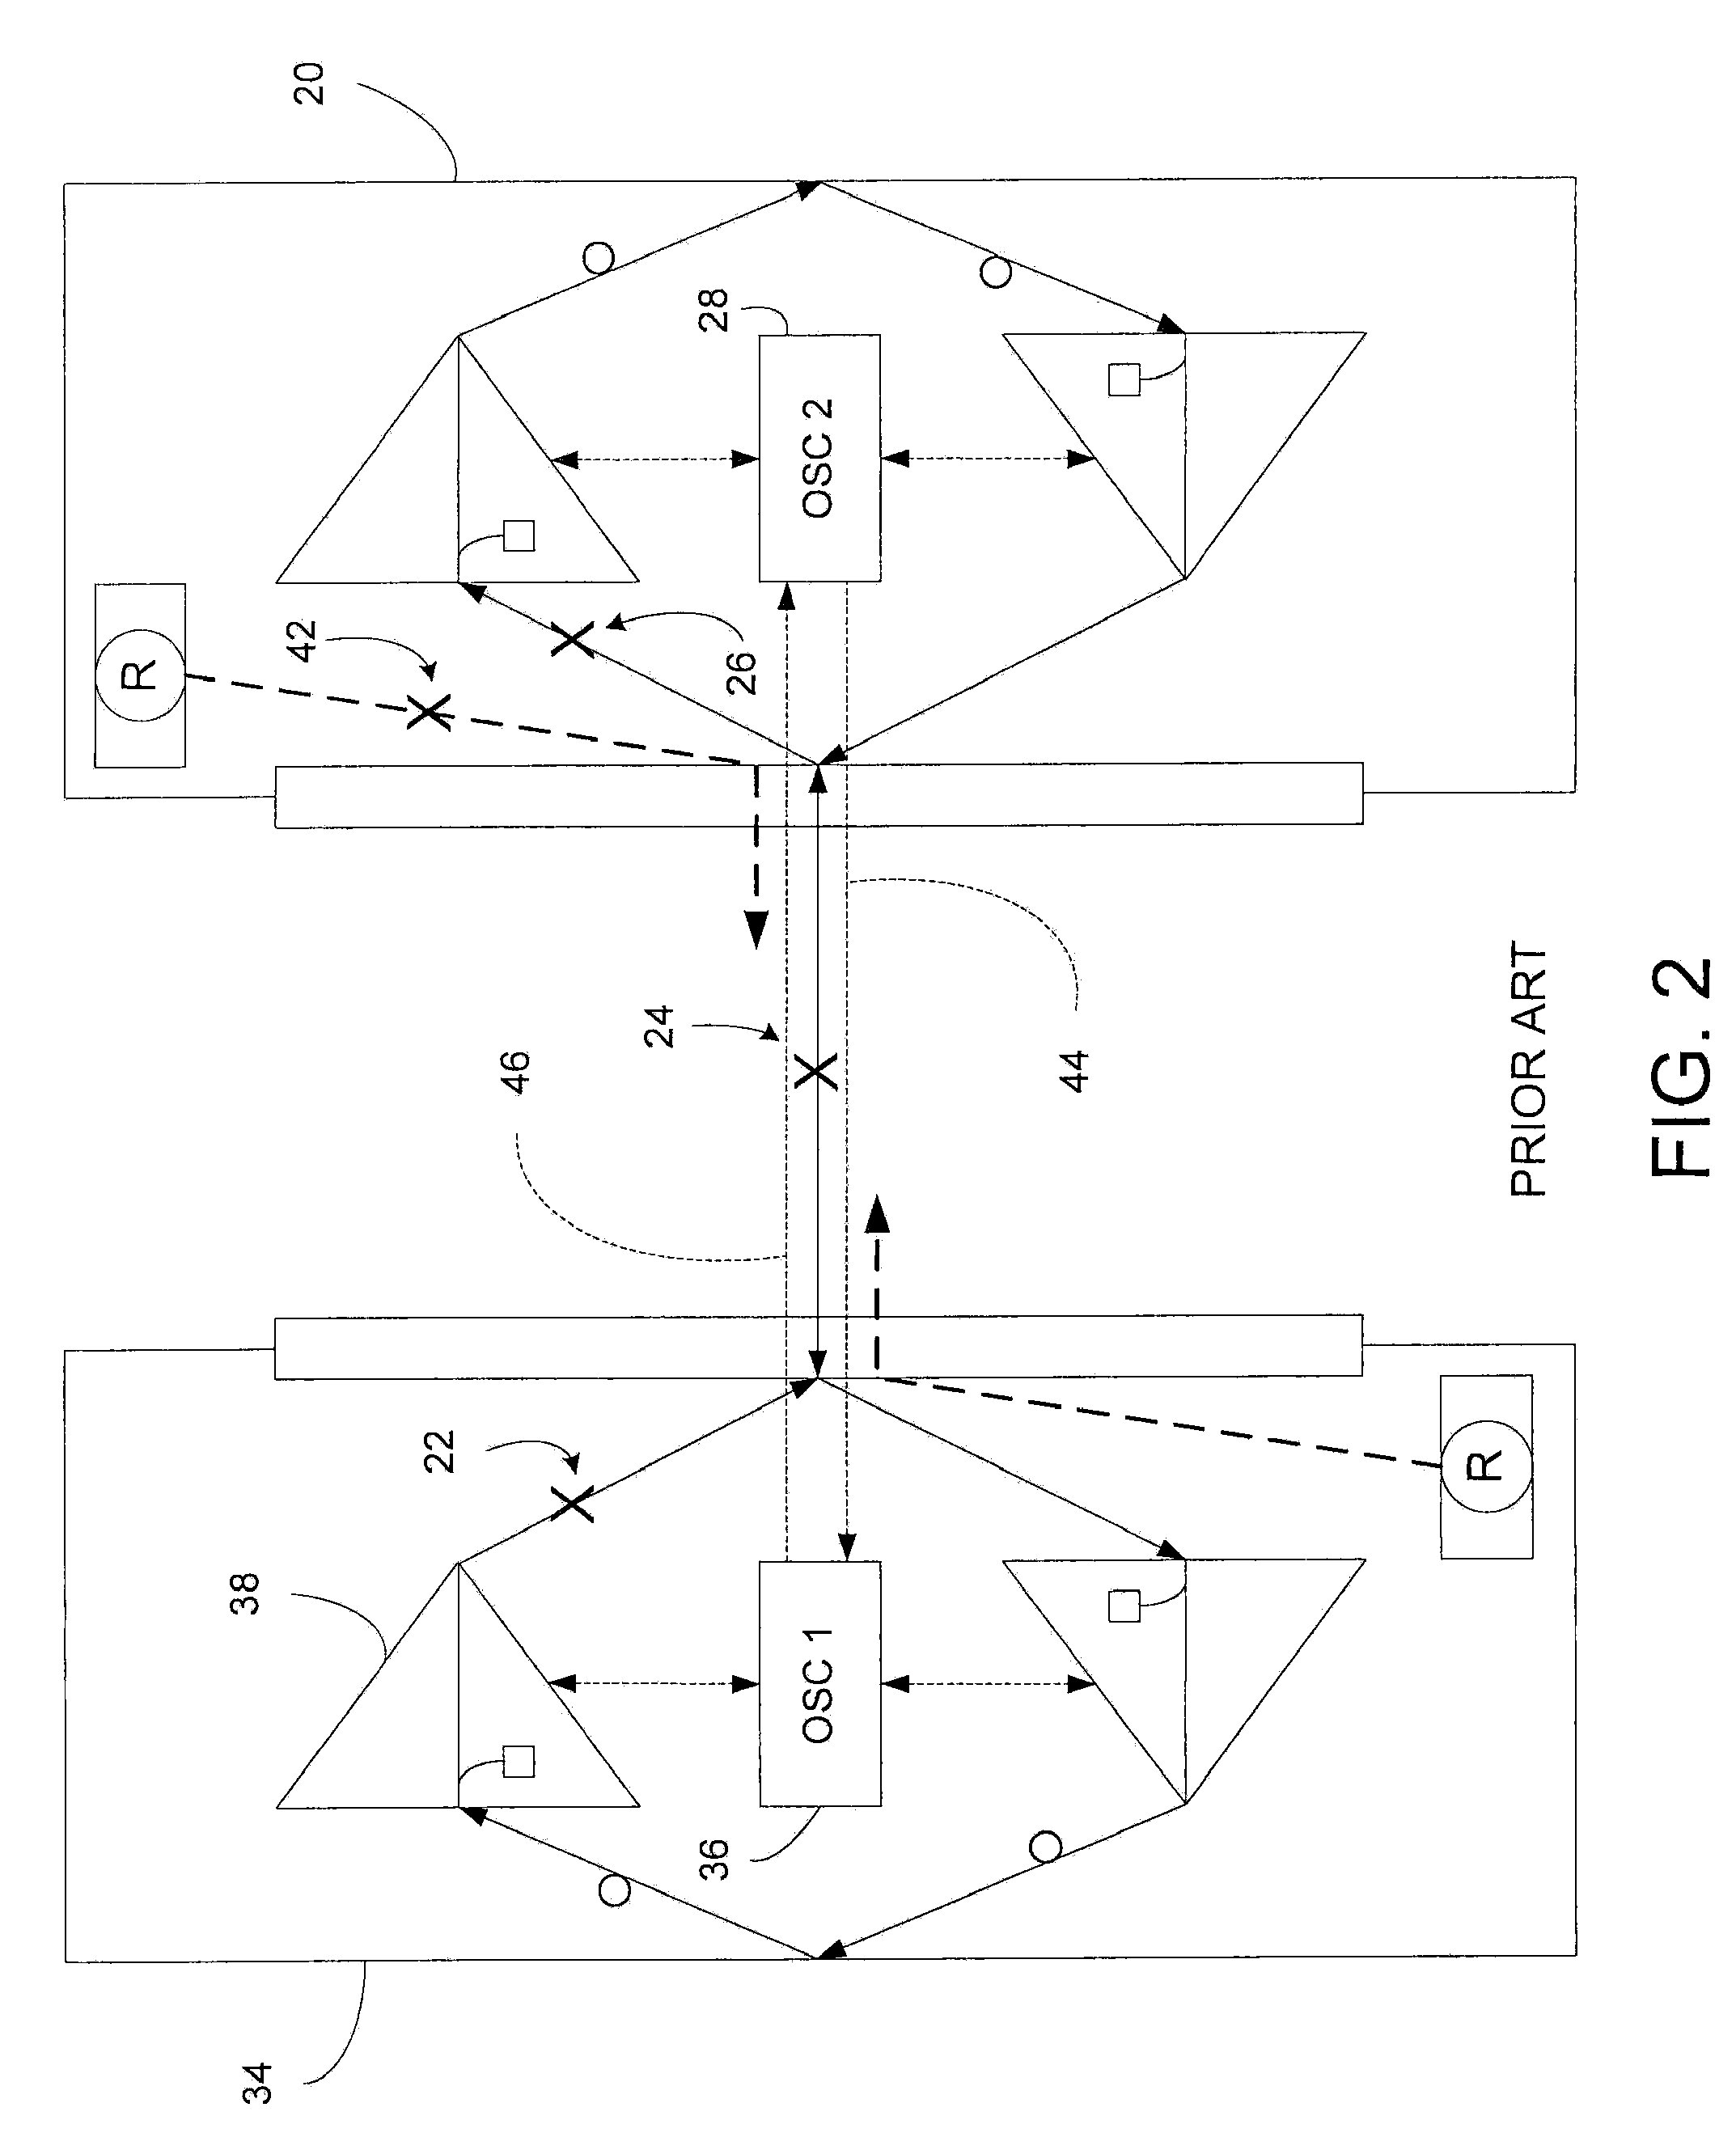 Automatic optical power management in optical communications system